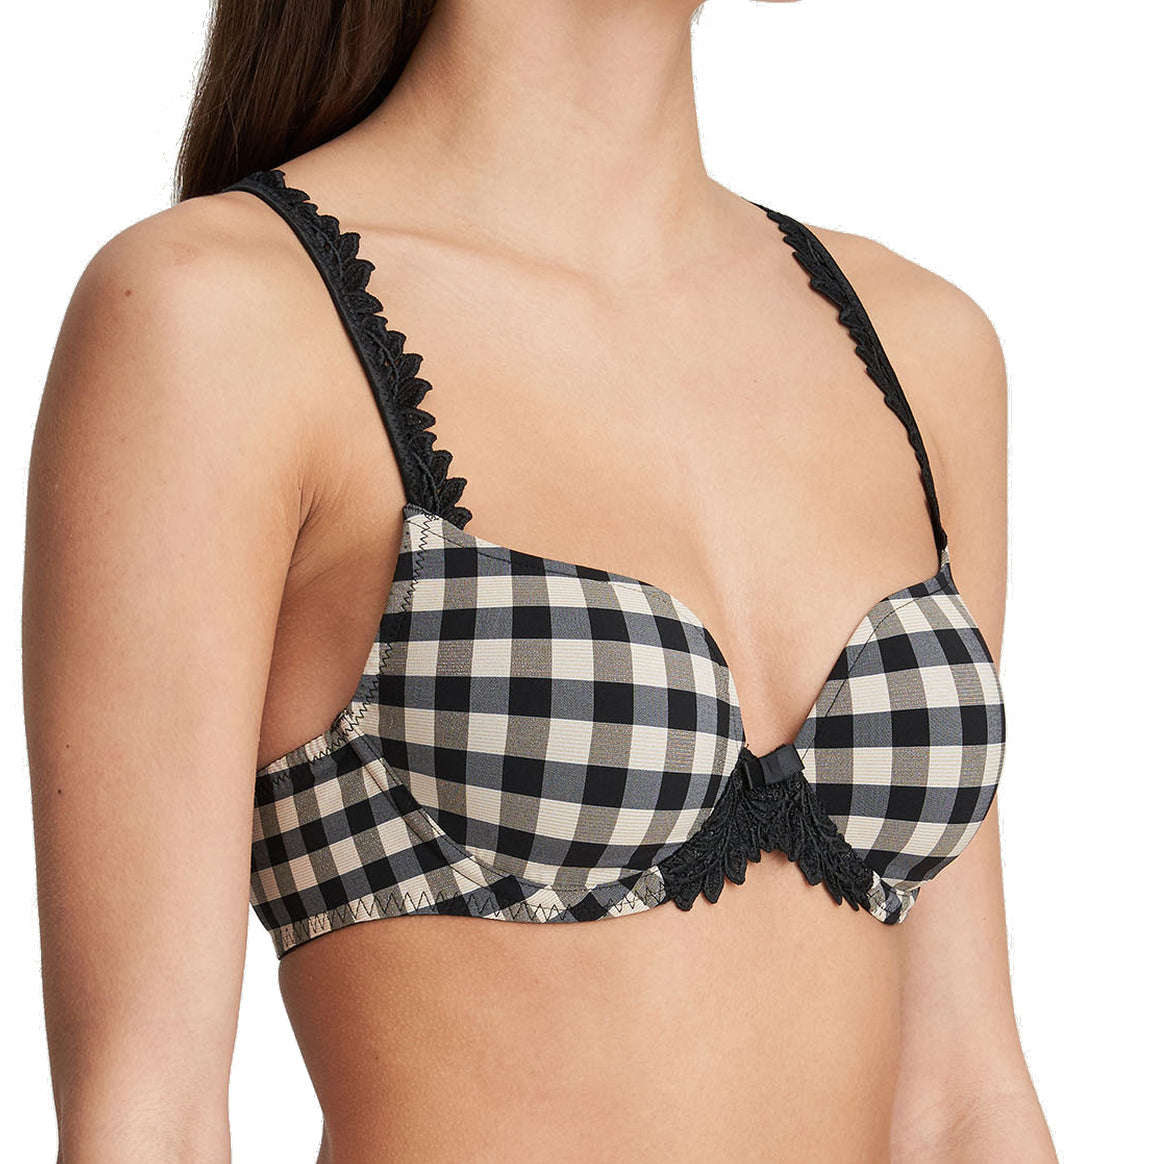 Maaree bra fits but for the sides where the material wrinkles up